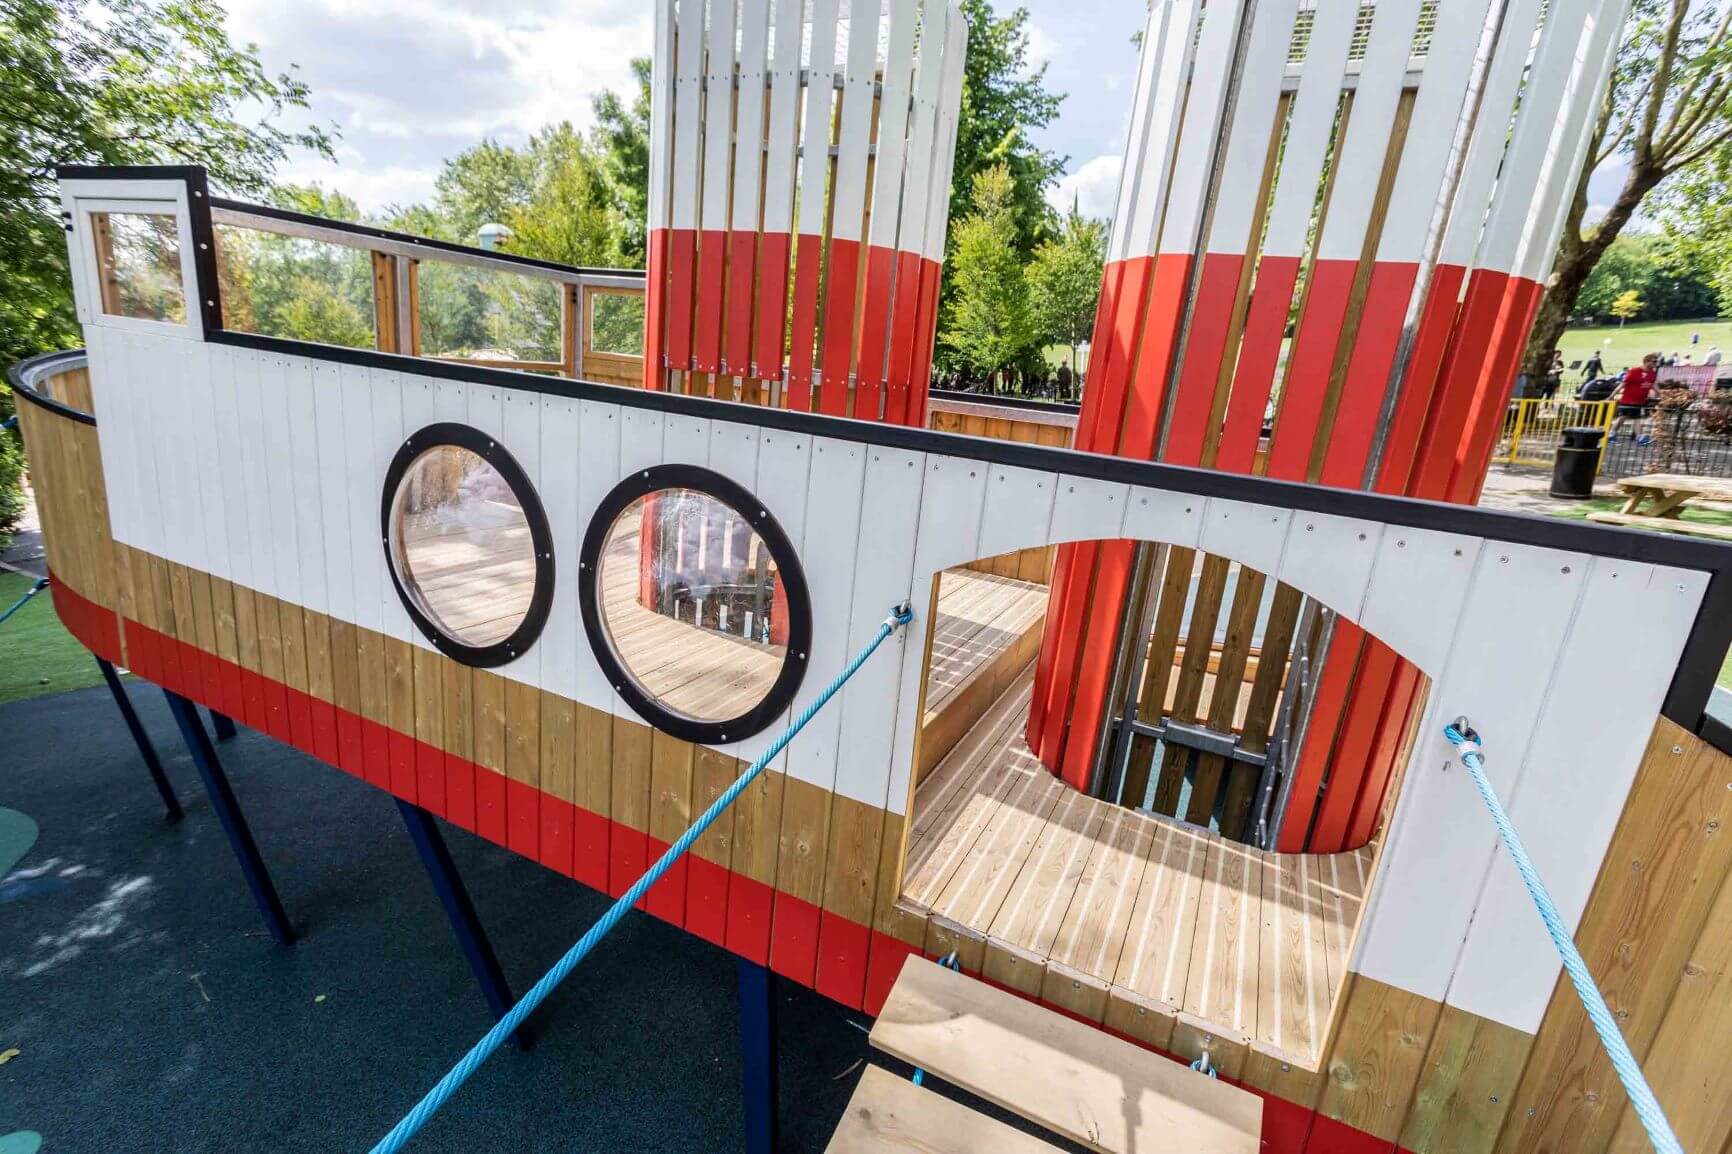 Marley CitiDeck Non-Slip Timber Decking installed in play area